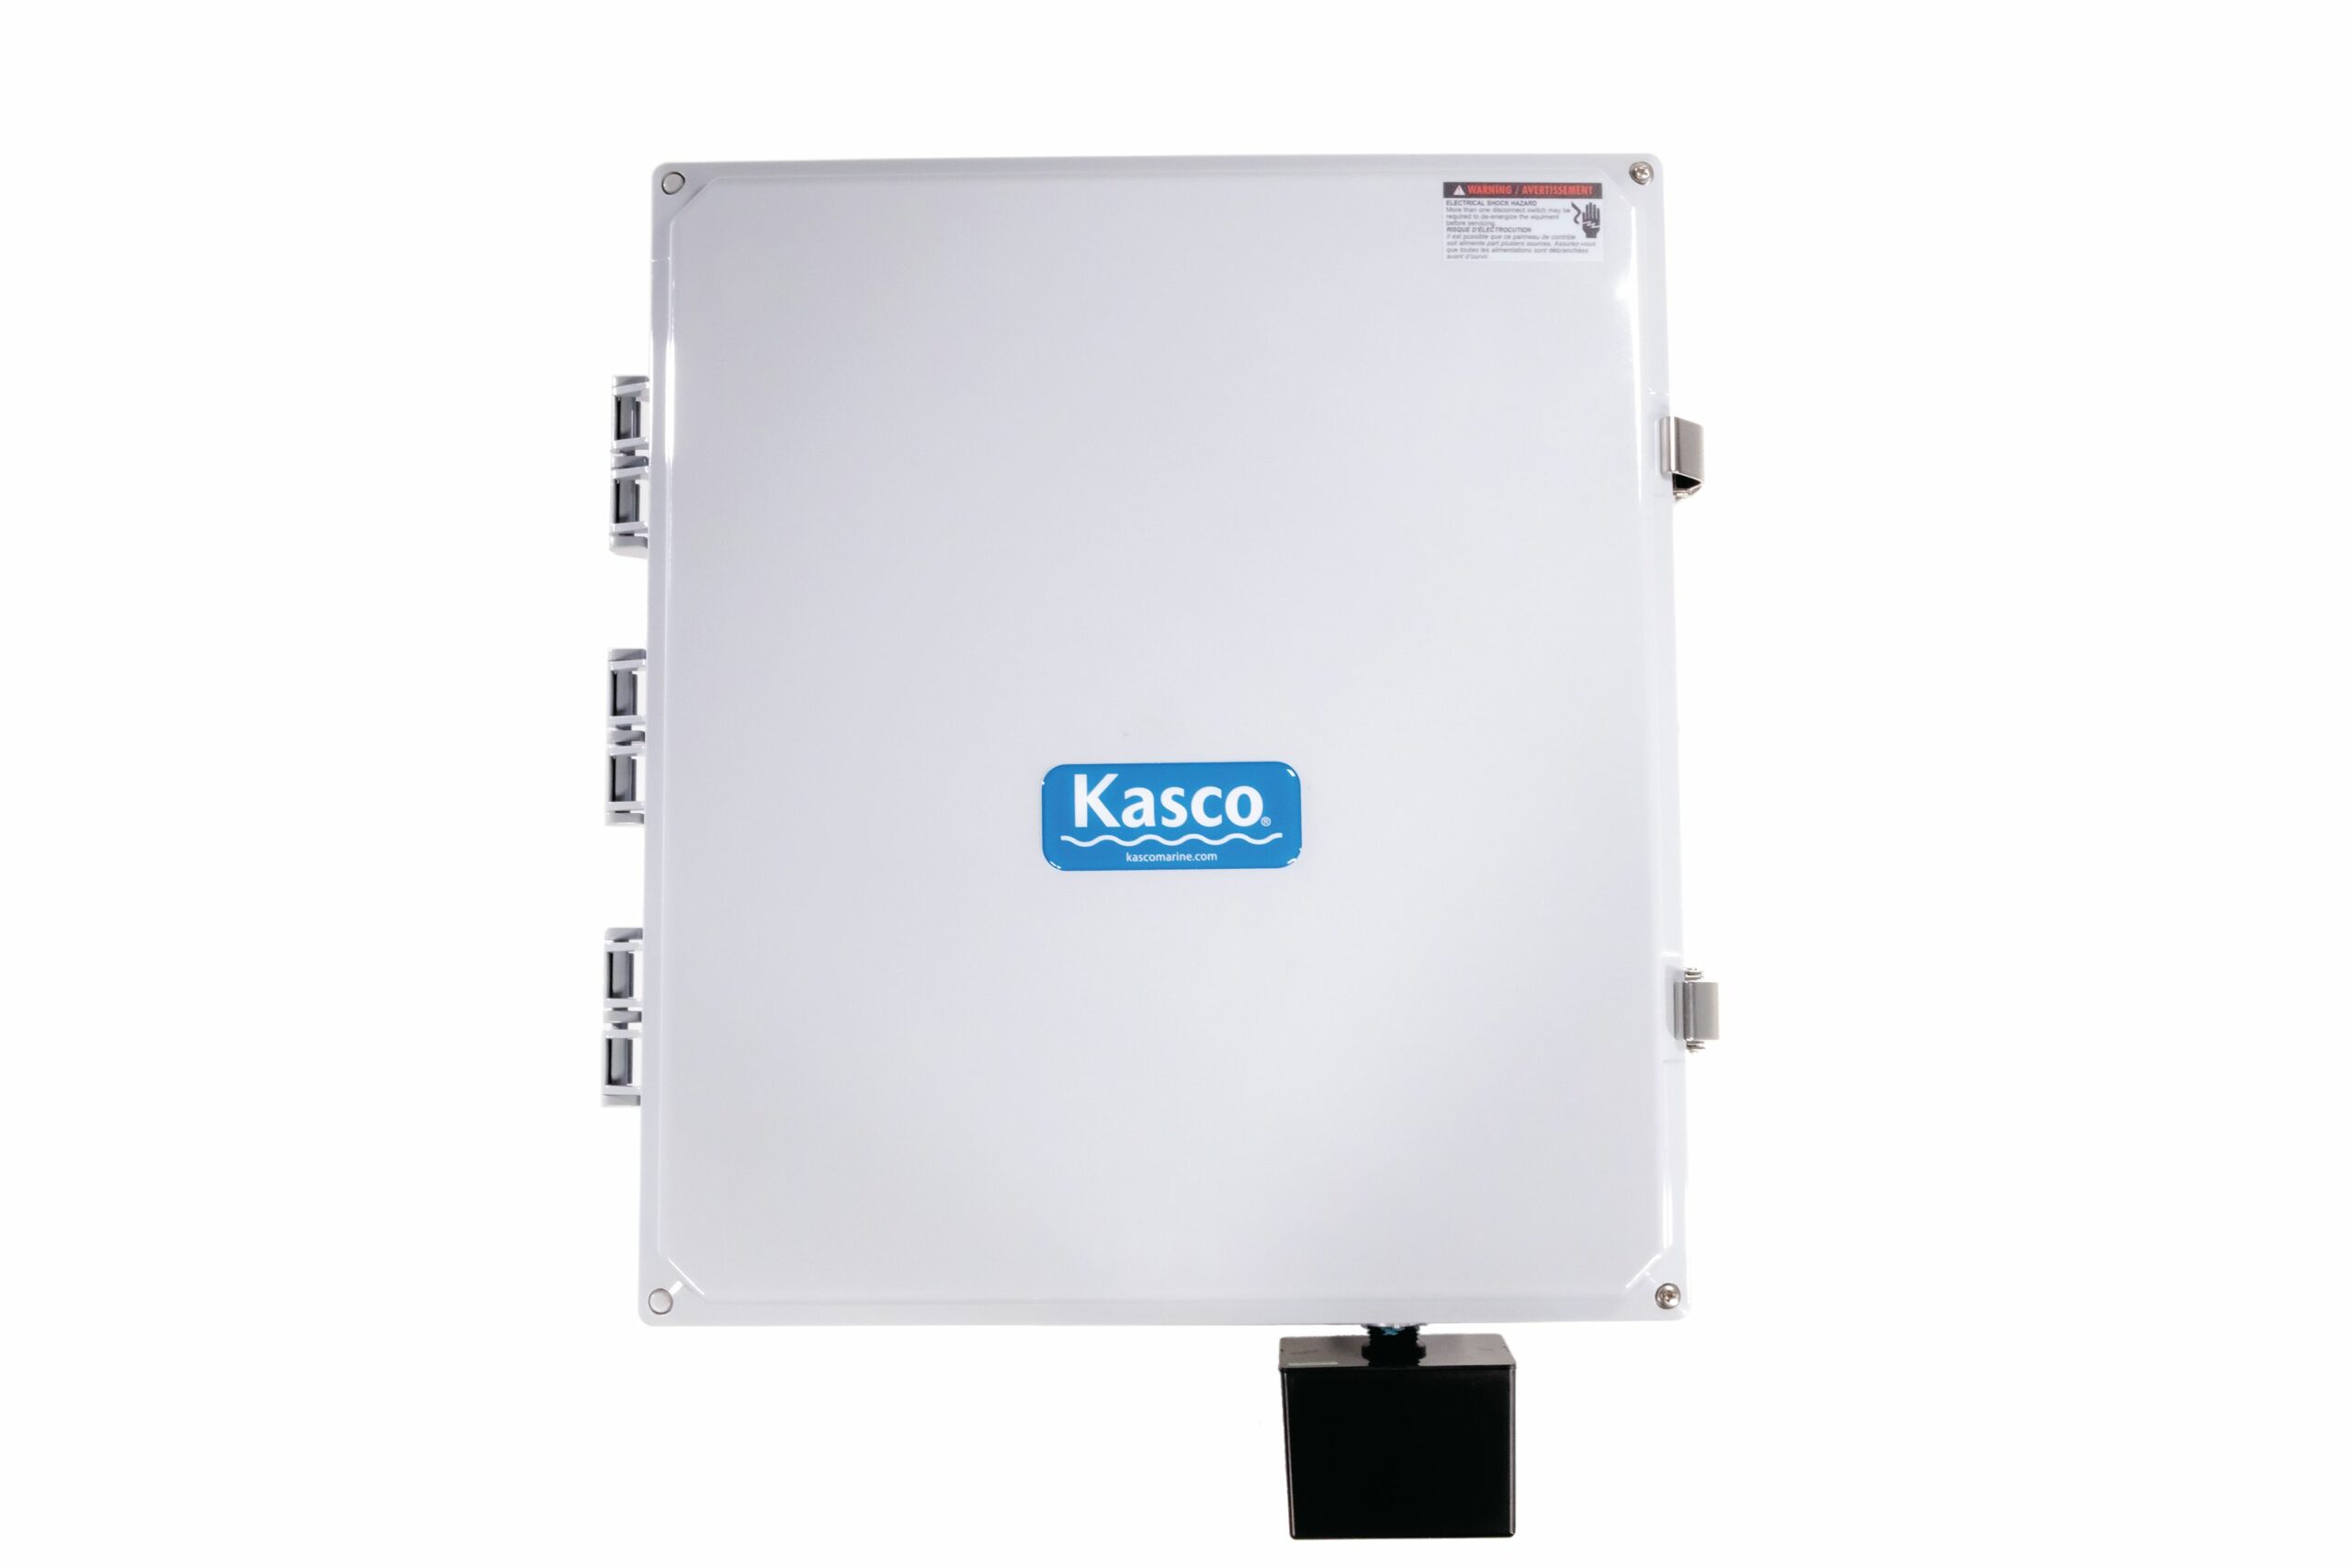 CF-3075 30A/240V Control Panel for 7.5 HP Kasco J Series Fountains